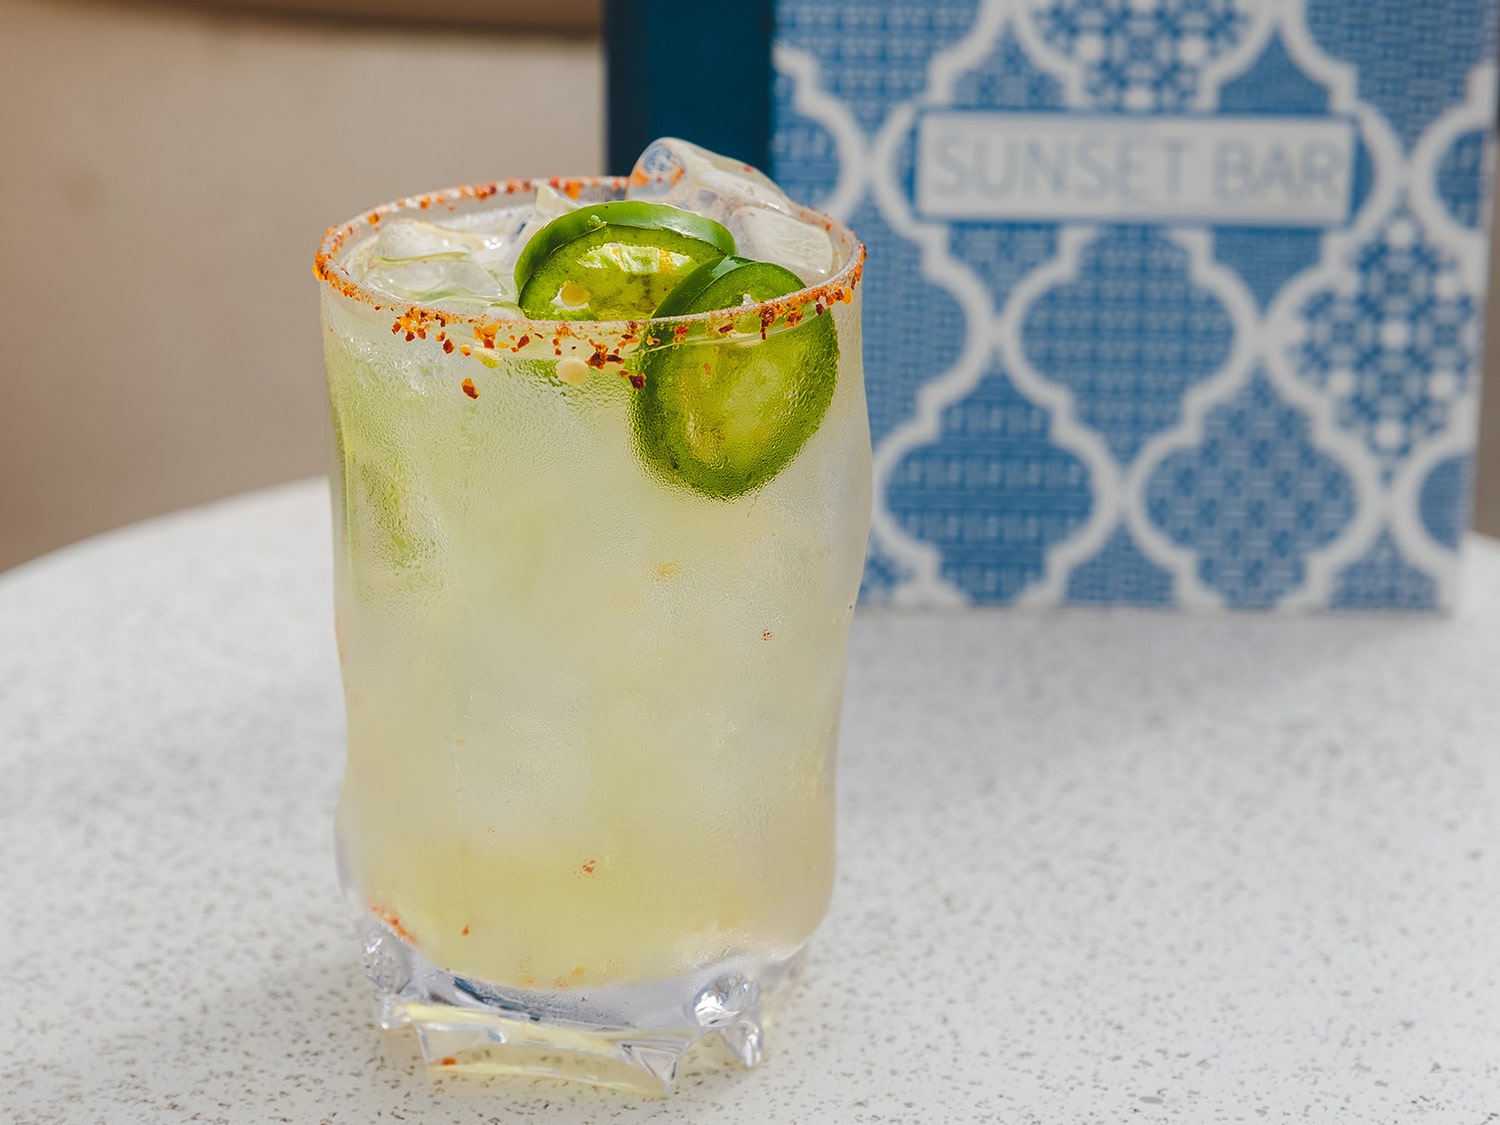 The Slim and Spicy Margarita from Celebrity Beyond’s Sunset Bar.